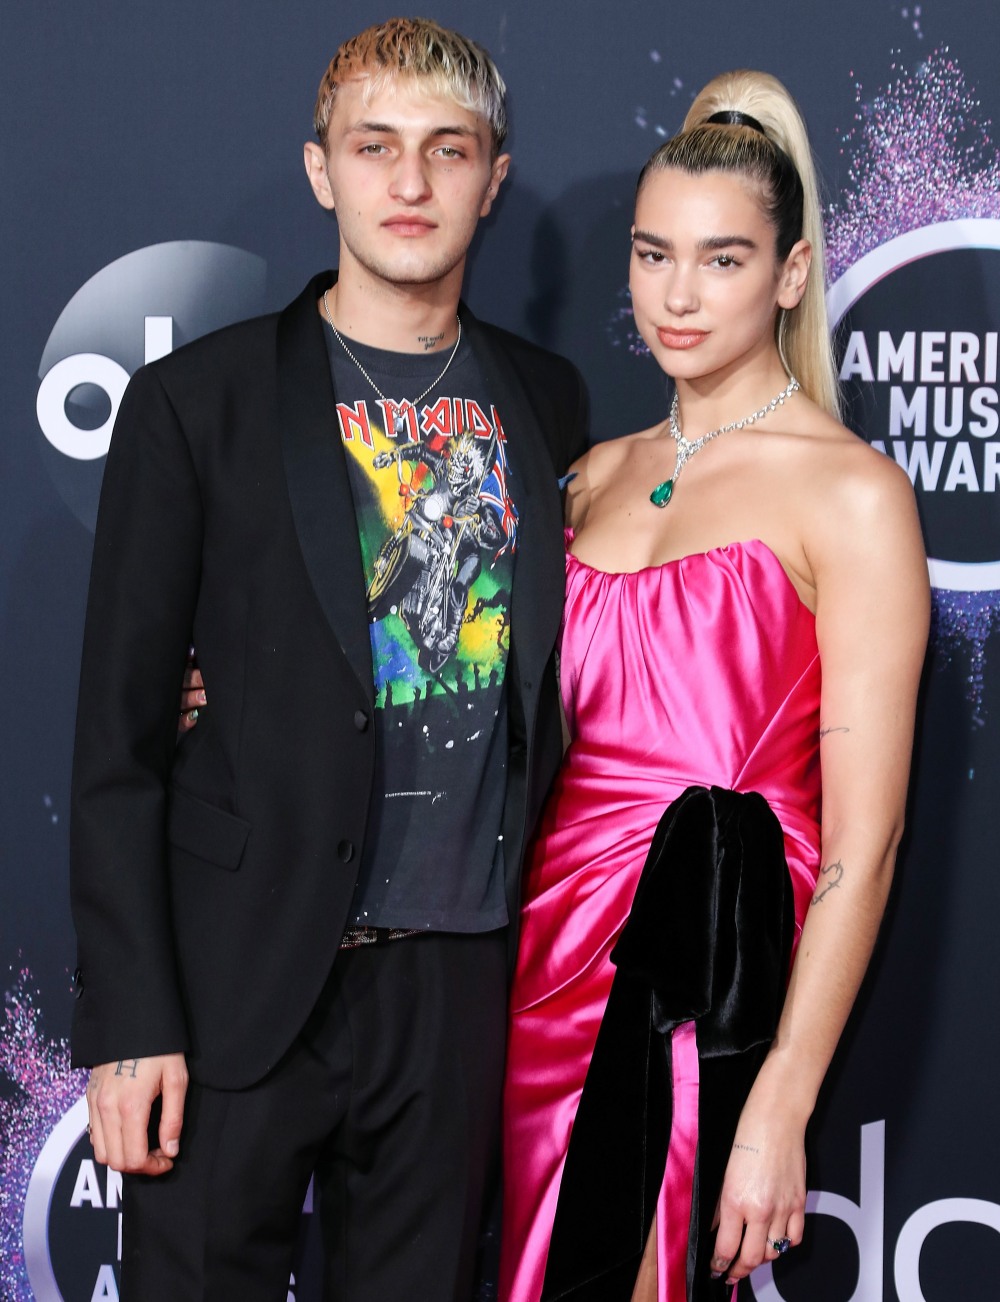 Anwar Hadid and girlfriend/singer Dua Lipa arrive at the 2019 American Music Awards held at Microsoft Theatre L.A. Live on November 24, 2019 in Los Angeles, California, United States.